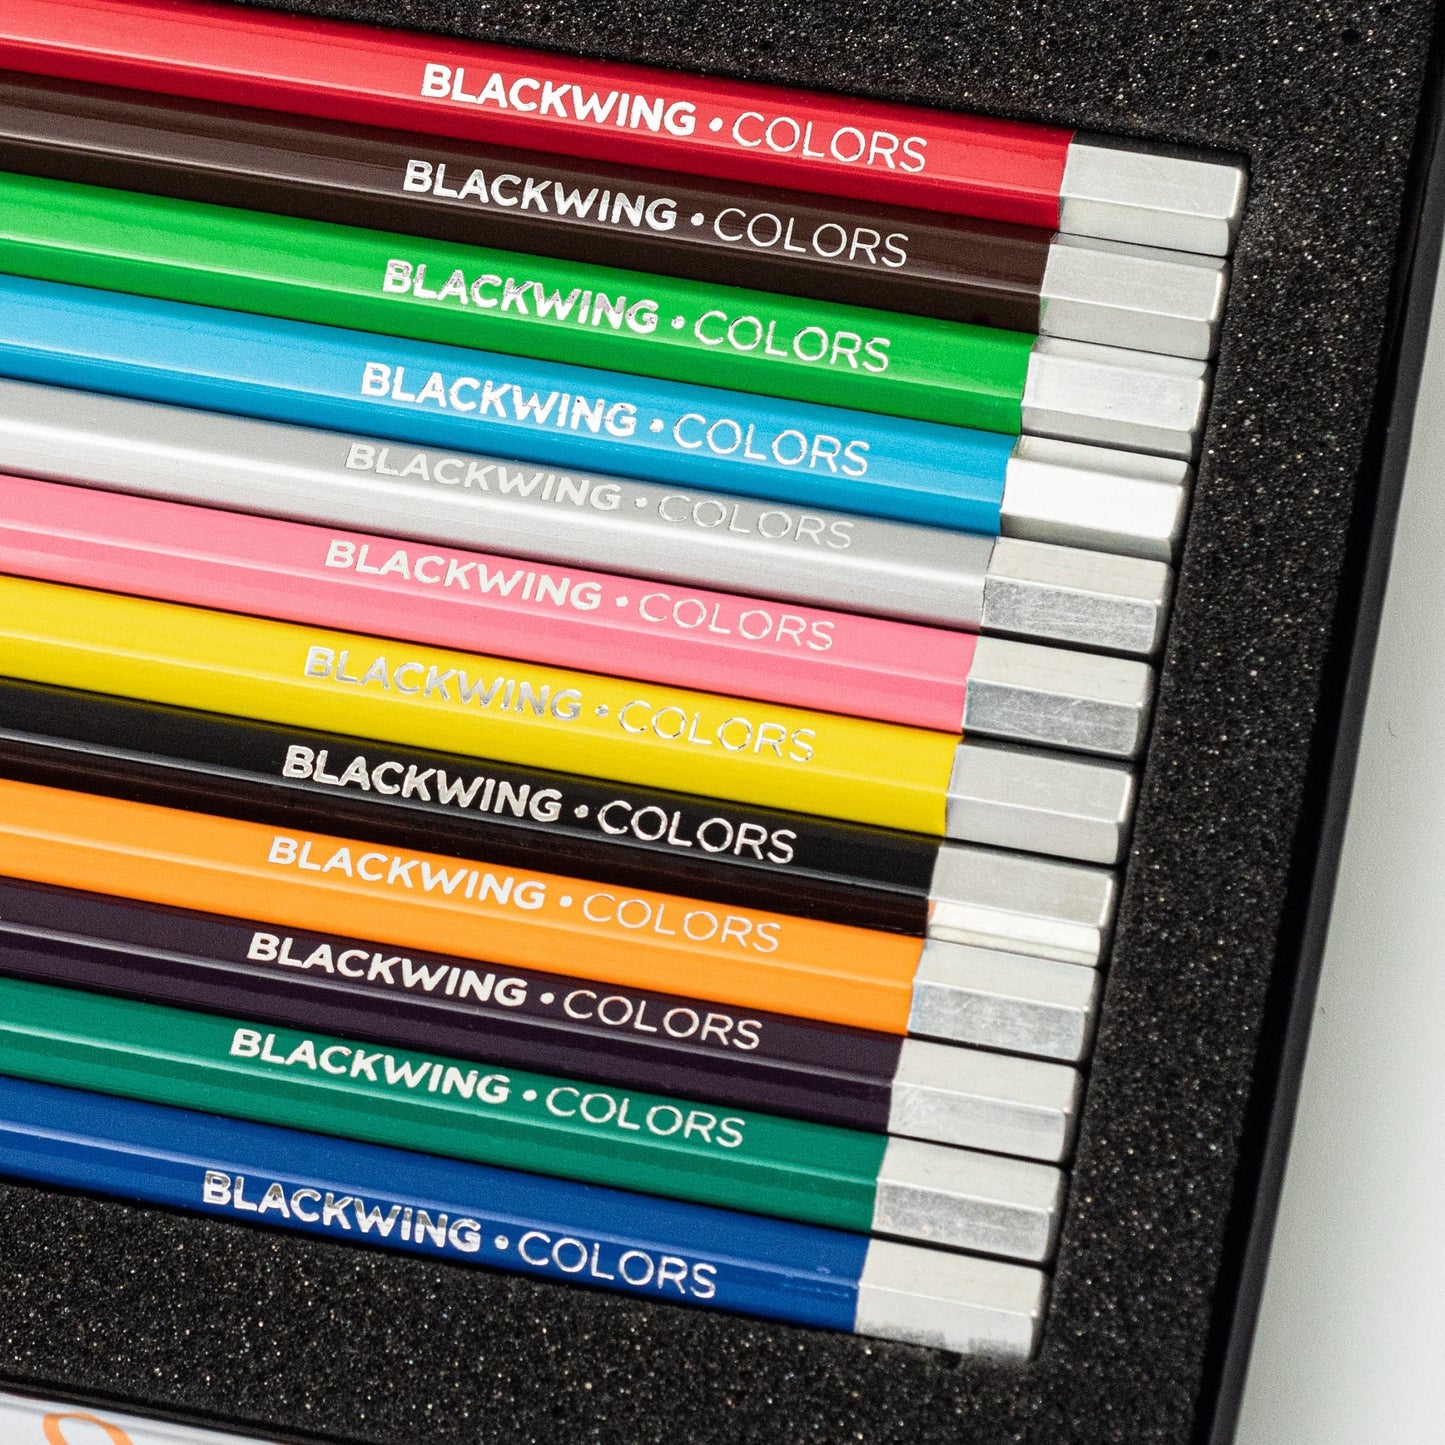 Blackwing - Colored Pencils